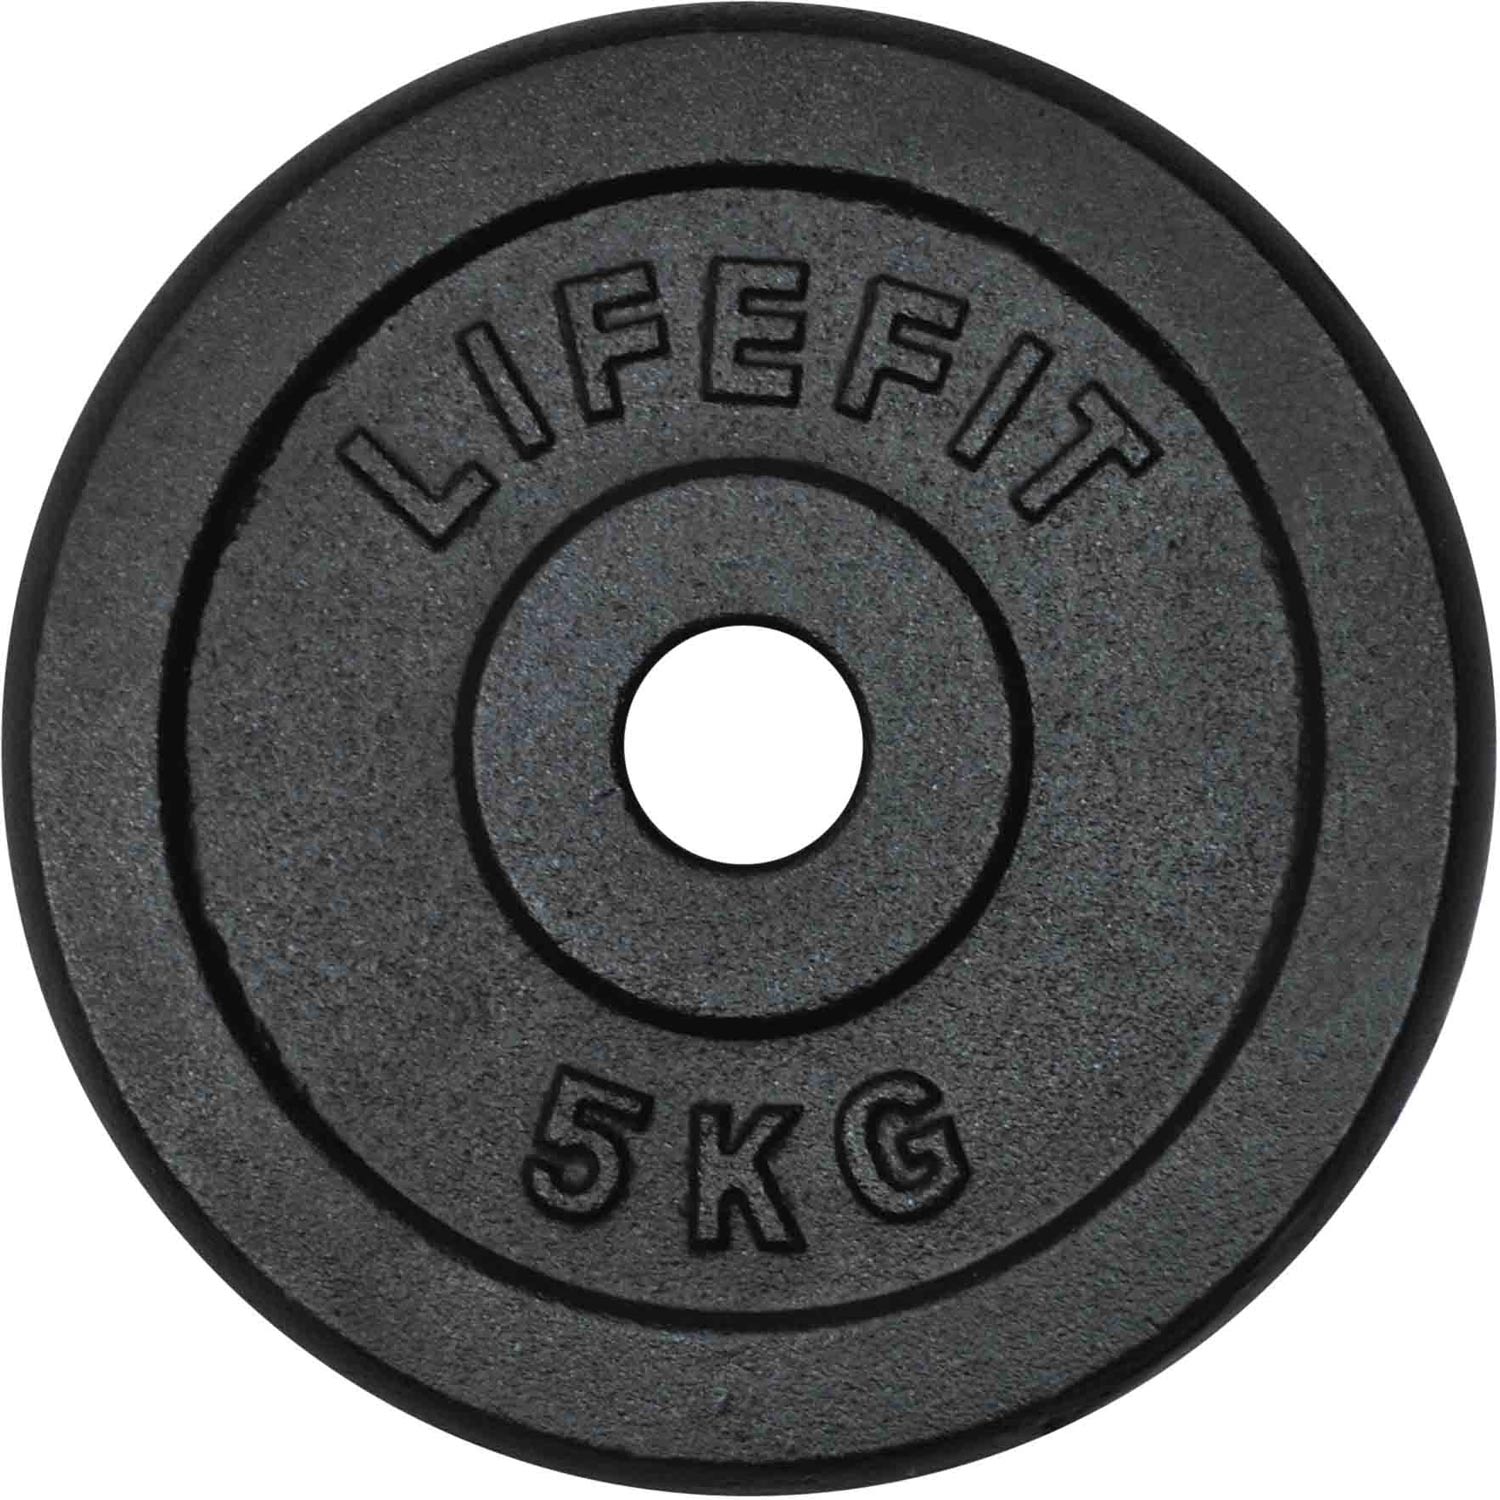 Weightlifting plate